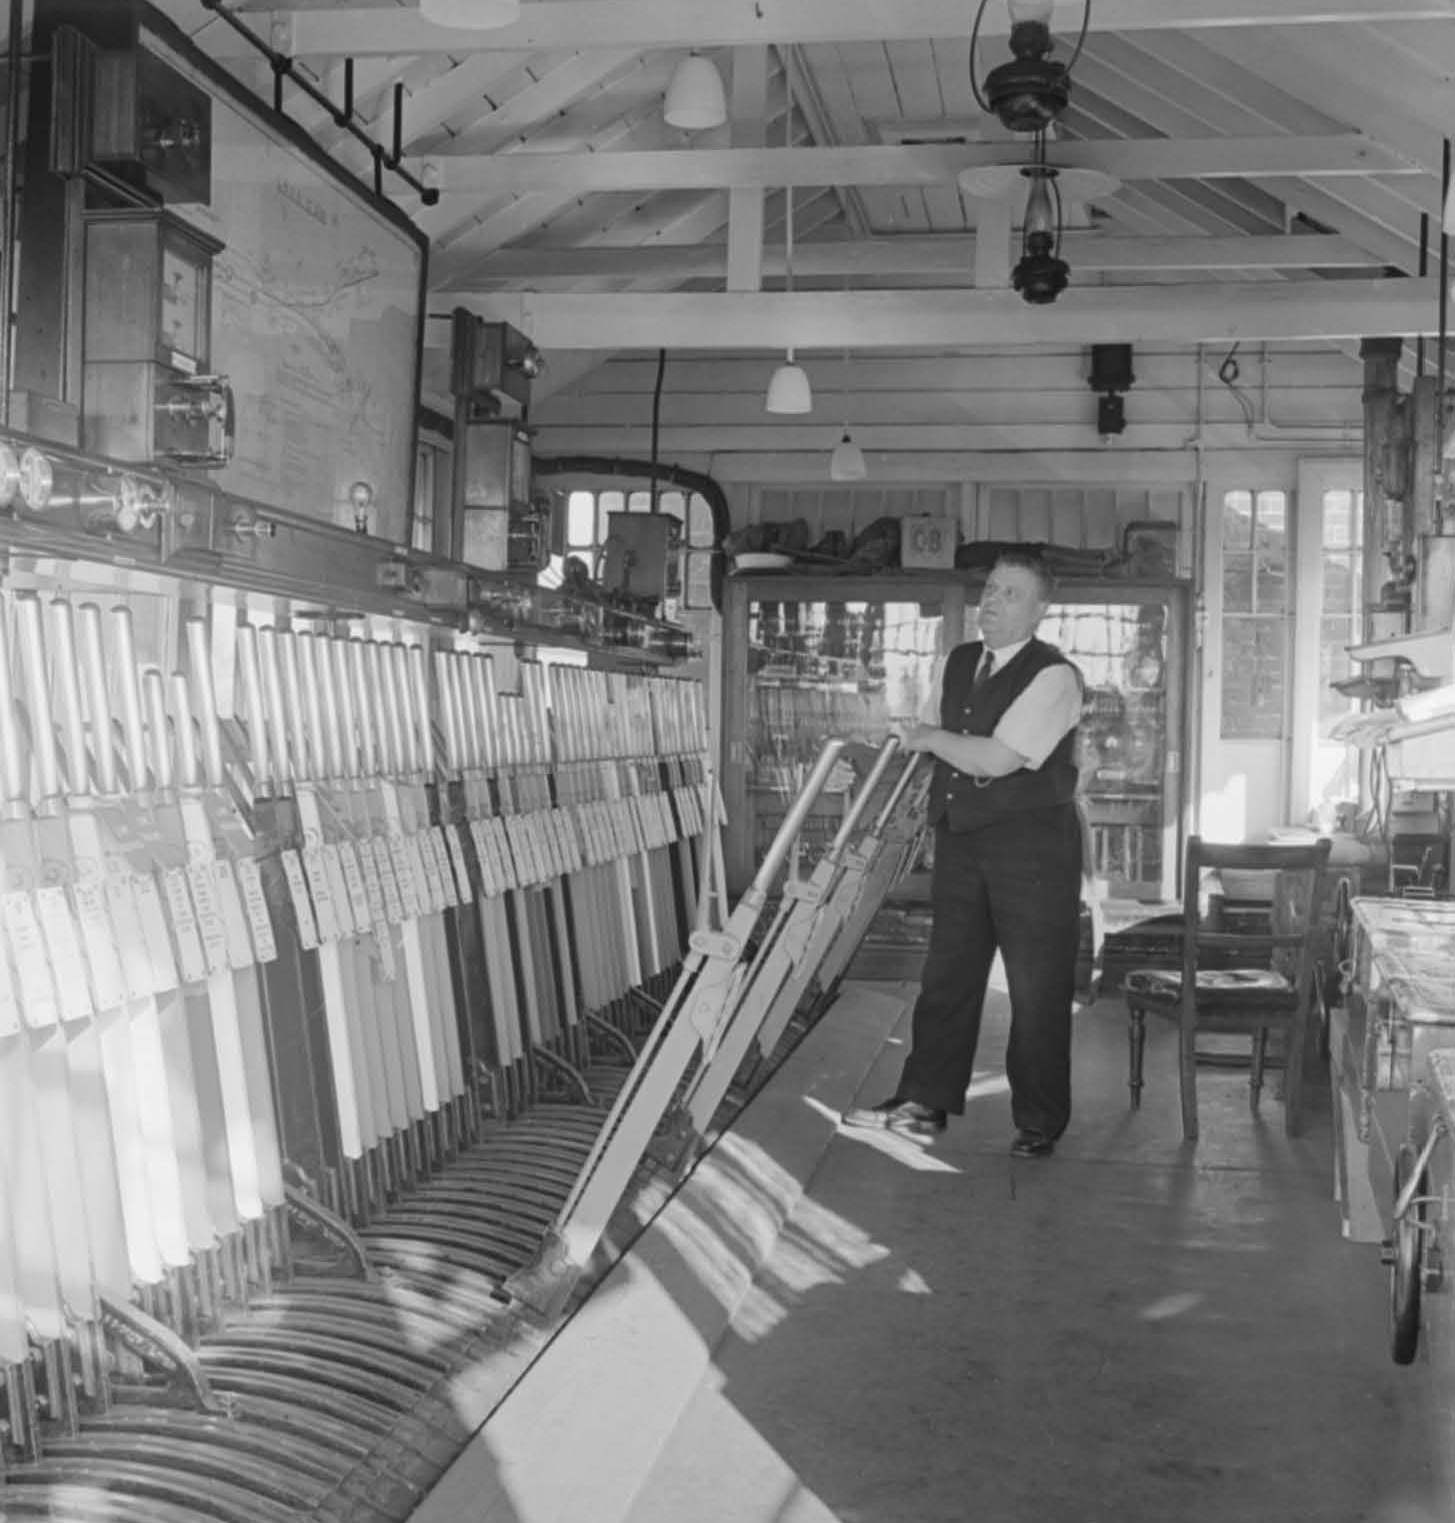 A signalman operating the levers in a British Railways signal box.